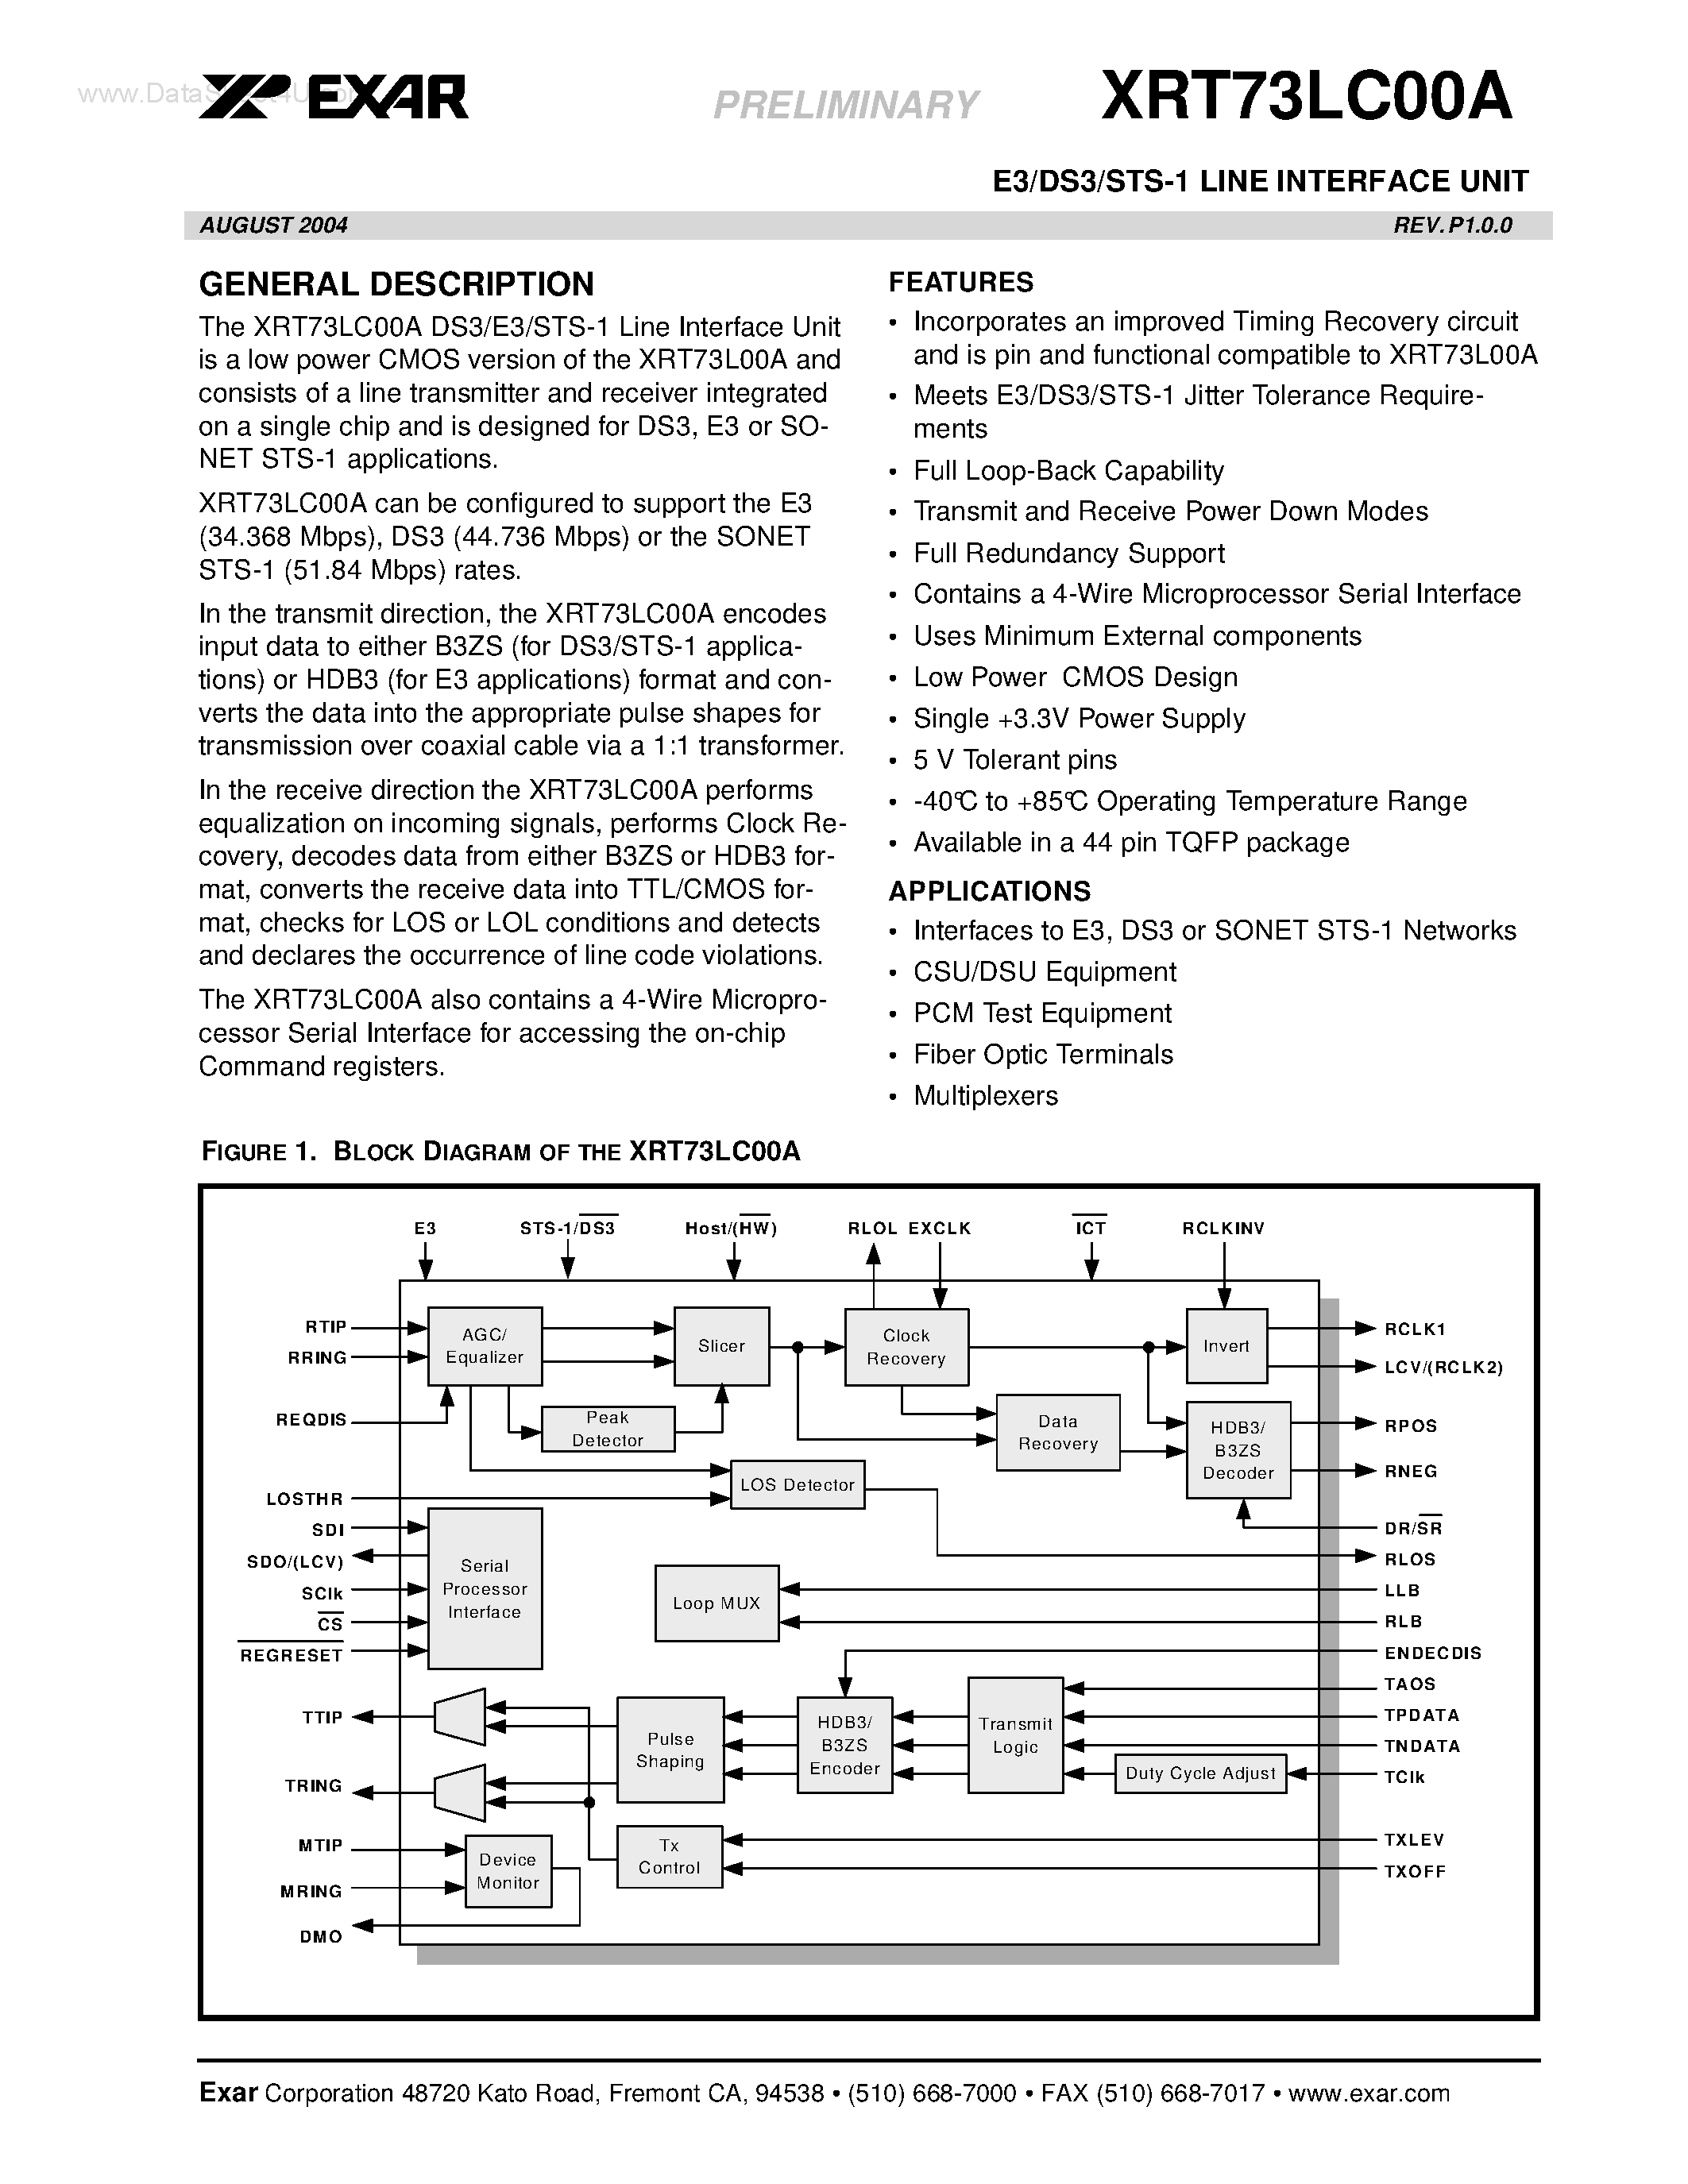 Datasheet XRT73LC00A - E3/DS3/STS-1 LINE INTERFACE UNIT page 1